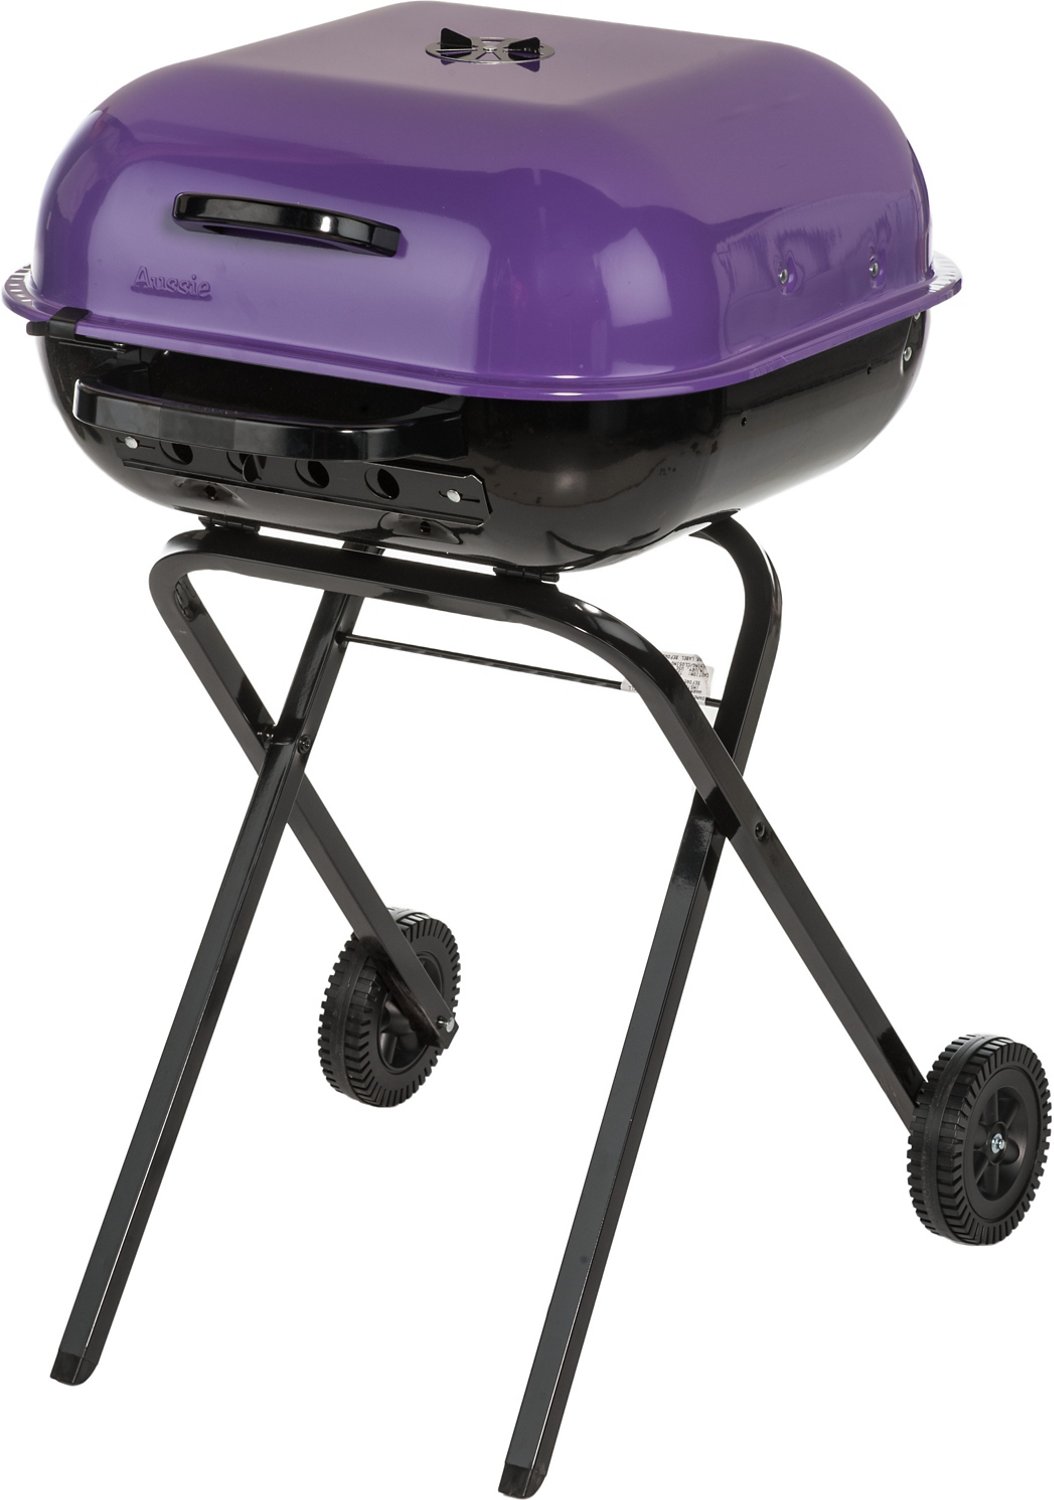 Aussie Walkabout Charcoal Portable Grill                                                                                         - view number 1 selected